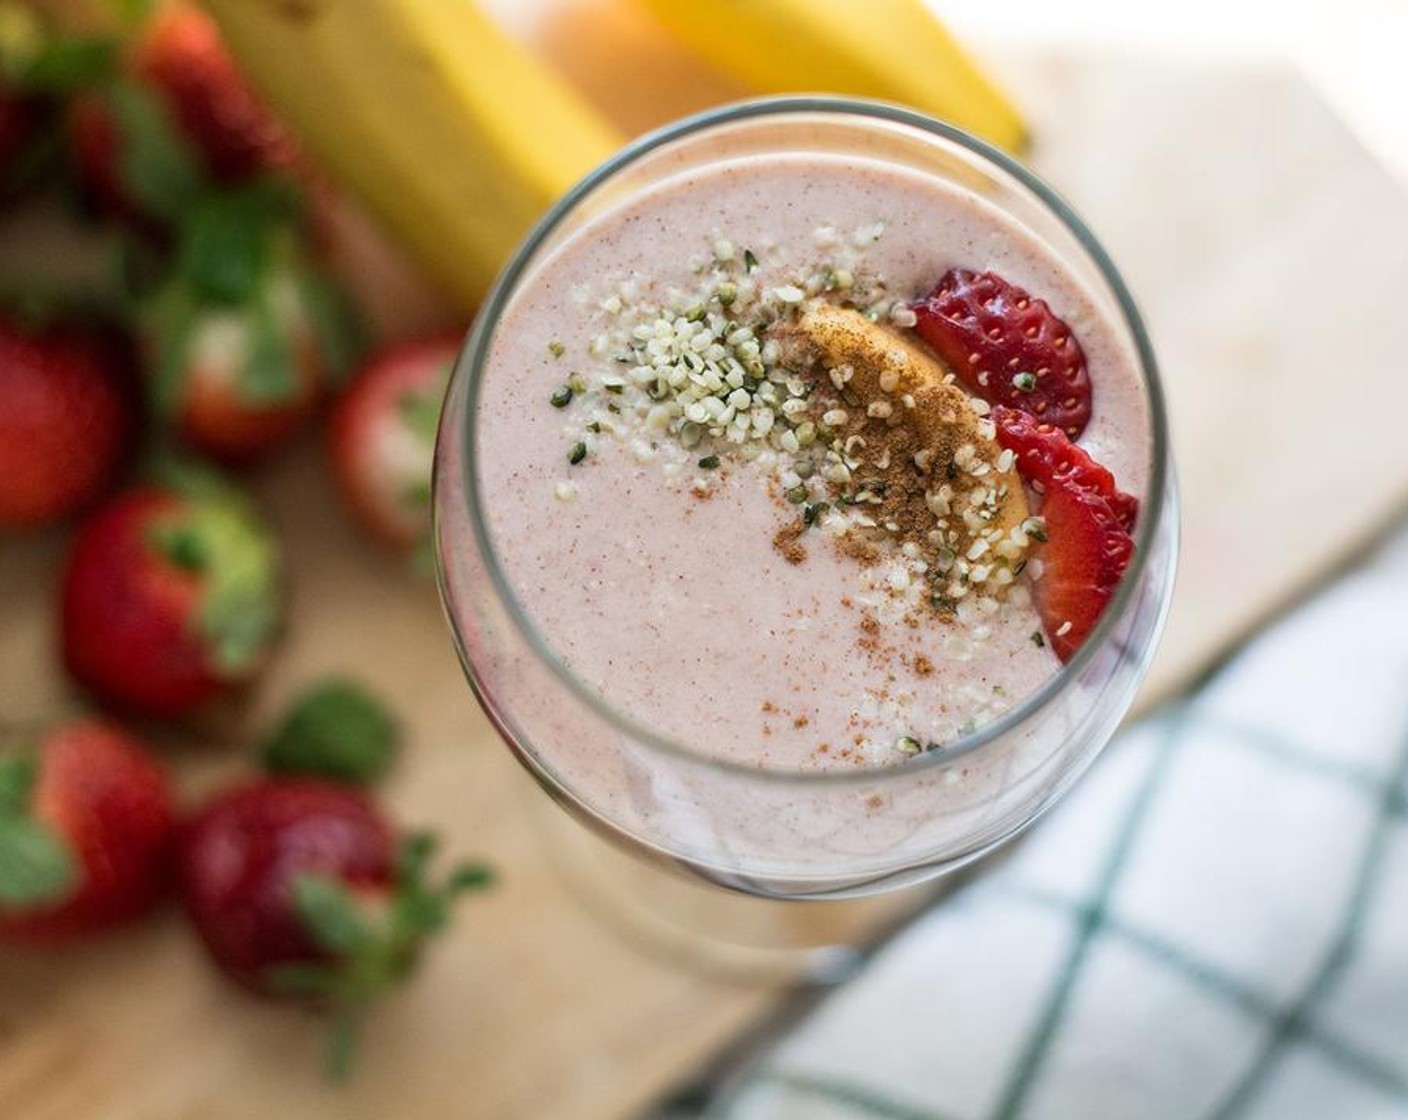 step 2 Divide into two glasses and top with additional hemp seeds, ground cinnamon, strawberries or papaya. Enjoy!